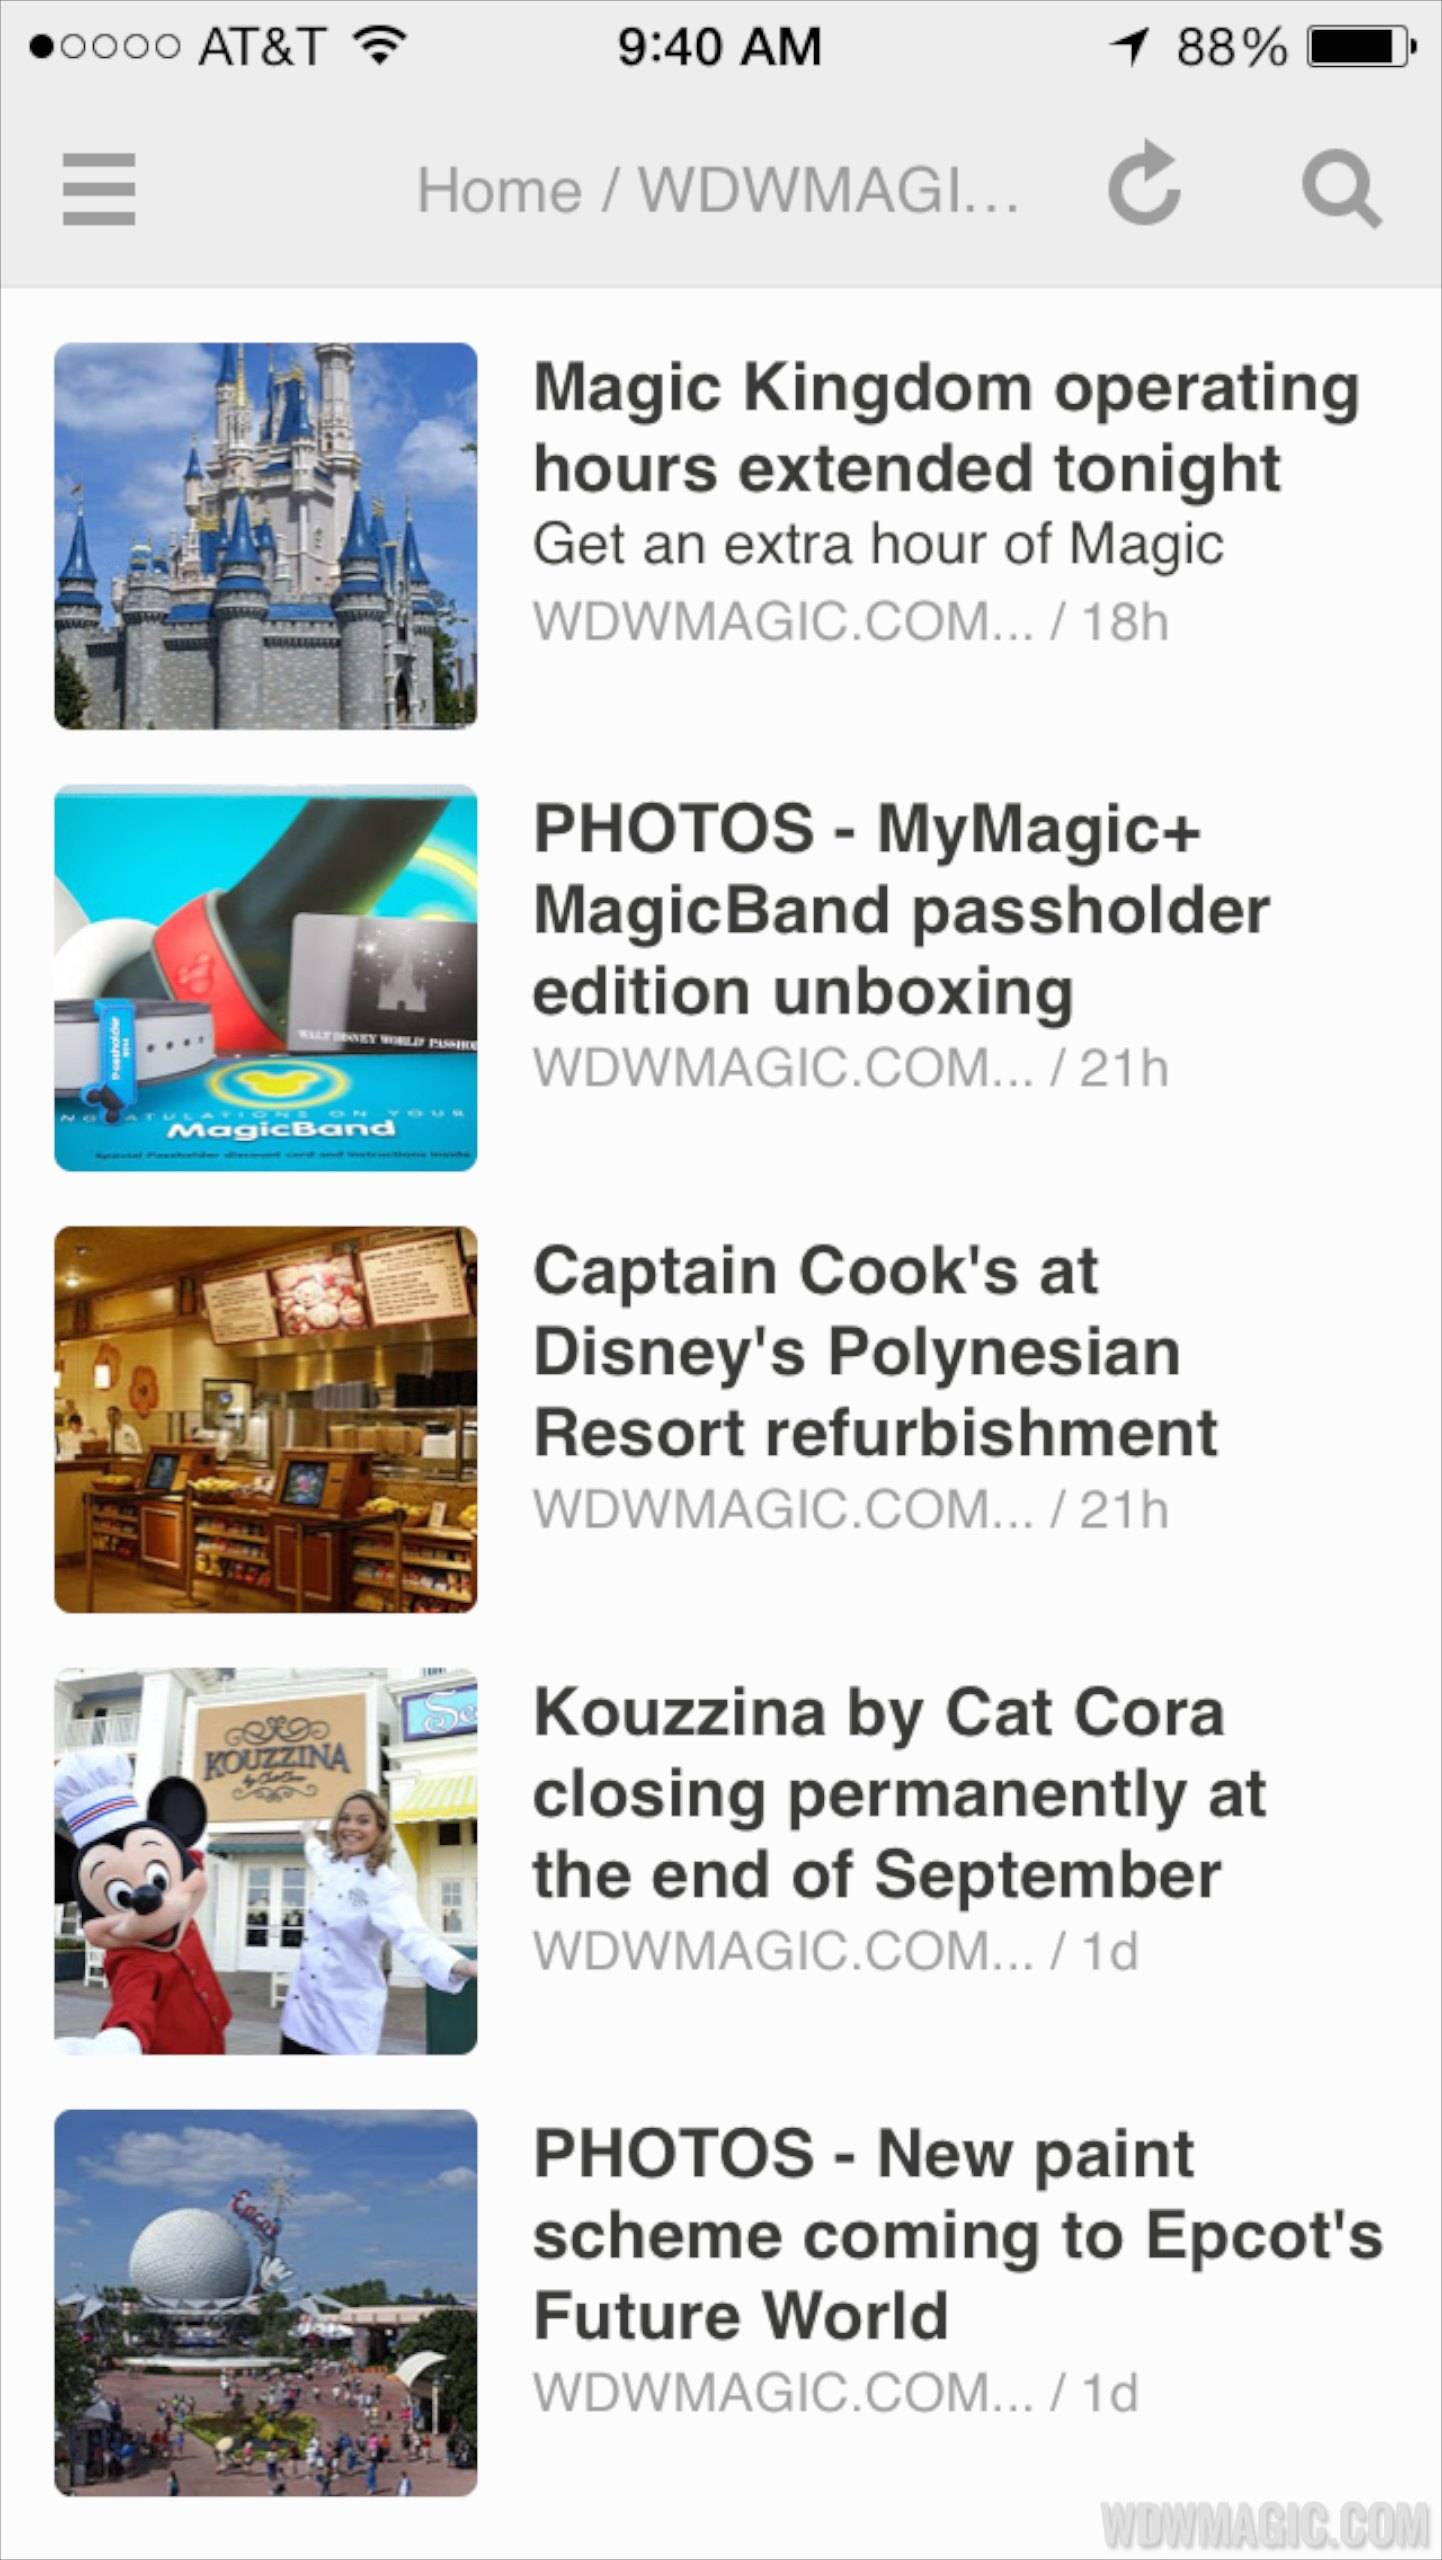 NEW - WDWMAGIC news headlines now available via RSS for Feedly and all RSS readers